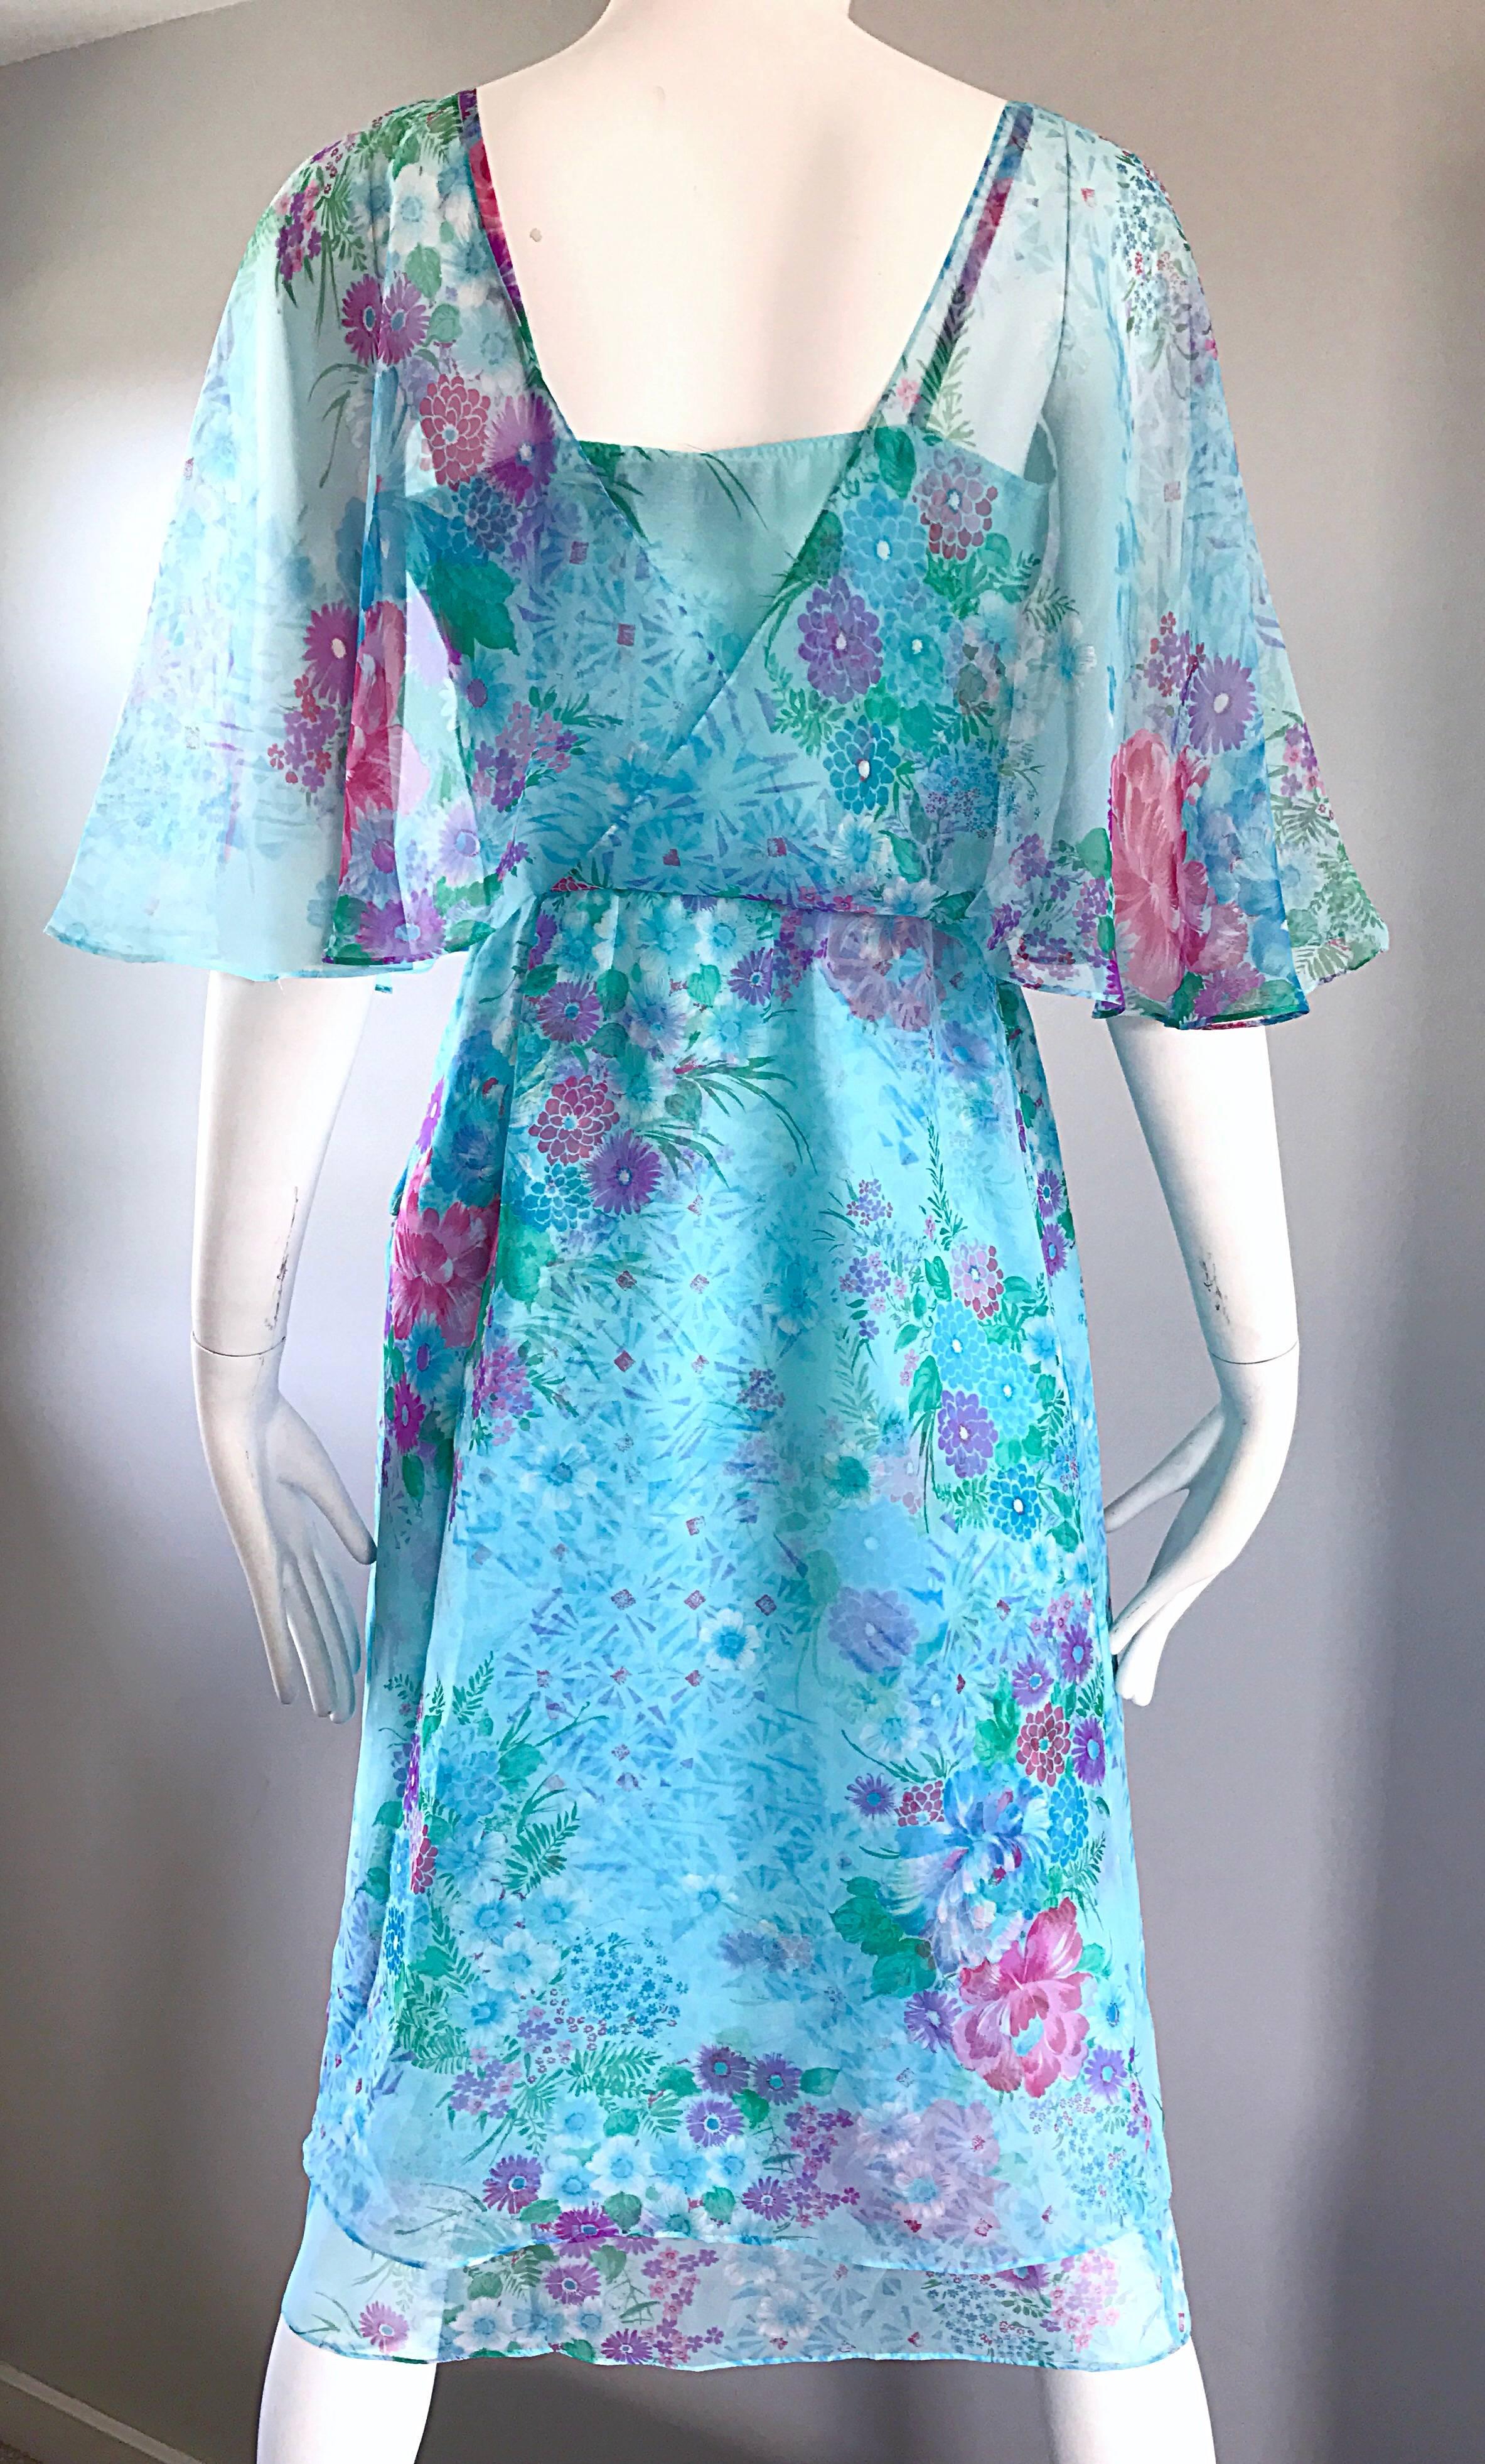 Women's Beautiful 1970s Jane Andres for Gumps Chiffon Vintage 70s Boho Chic Dress For Sale